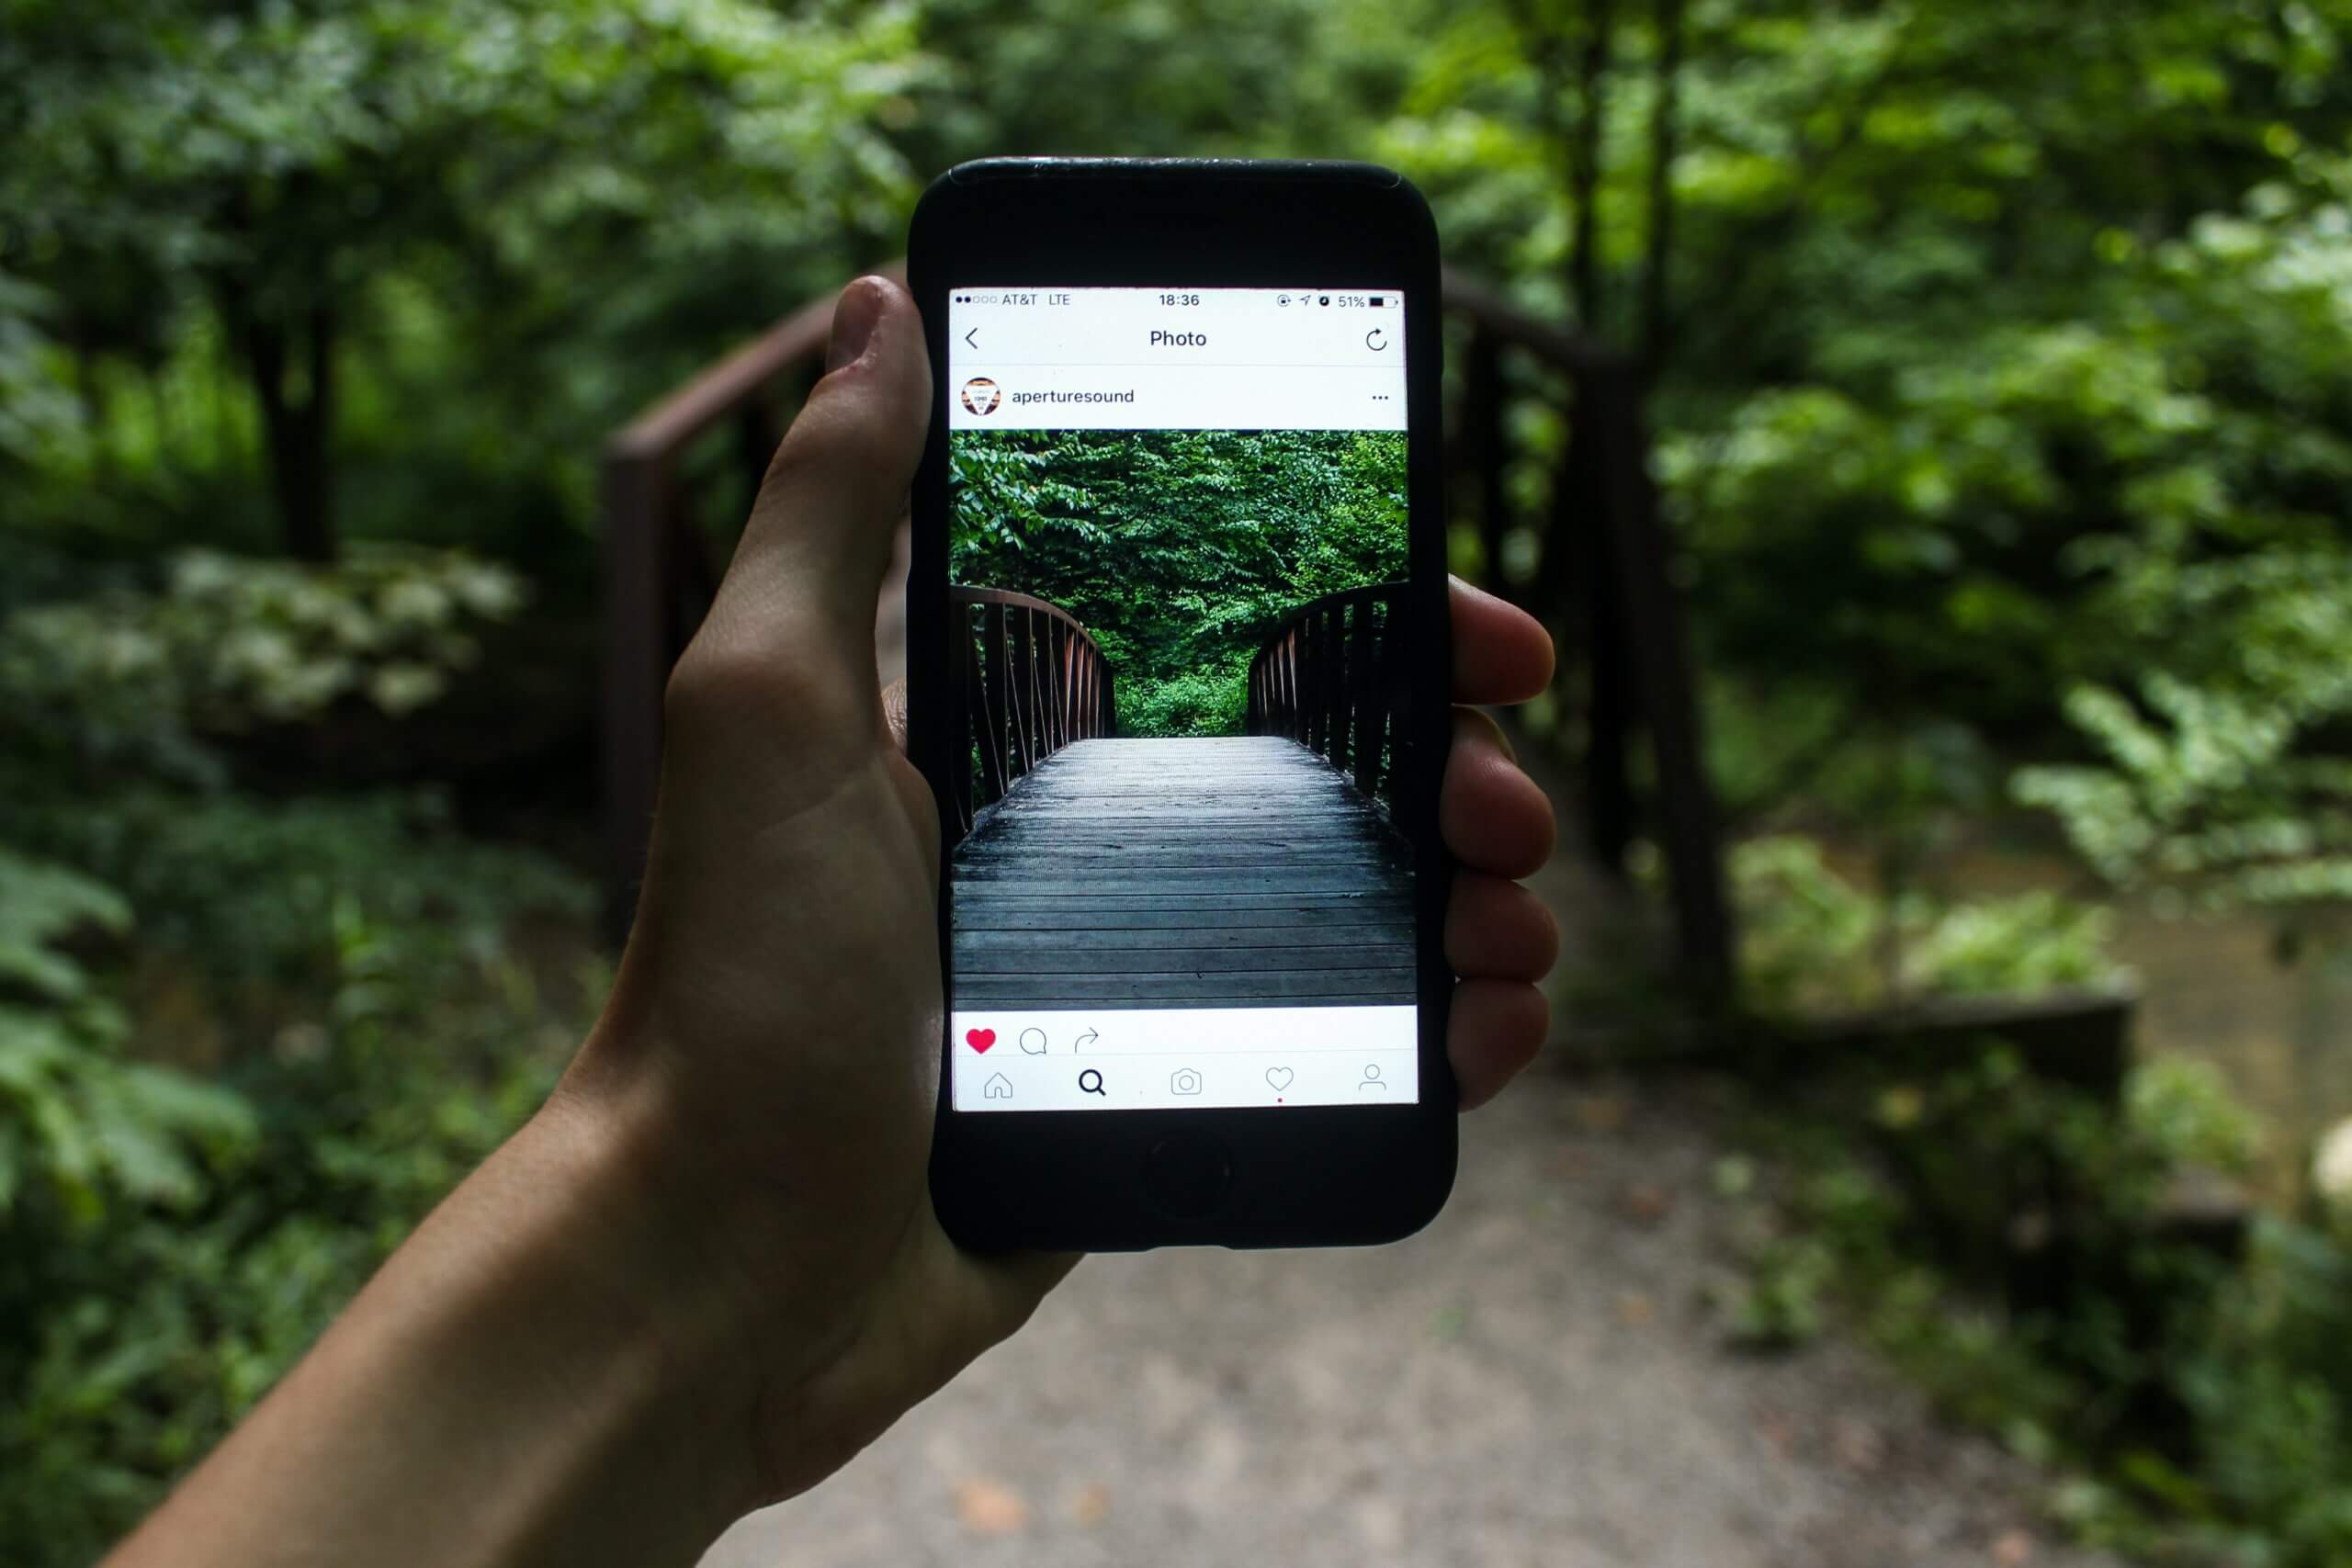 Person holding smartphone taking picture of wooden bridge surrounded by lush greenery.